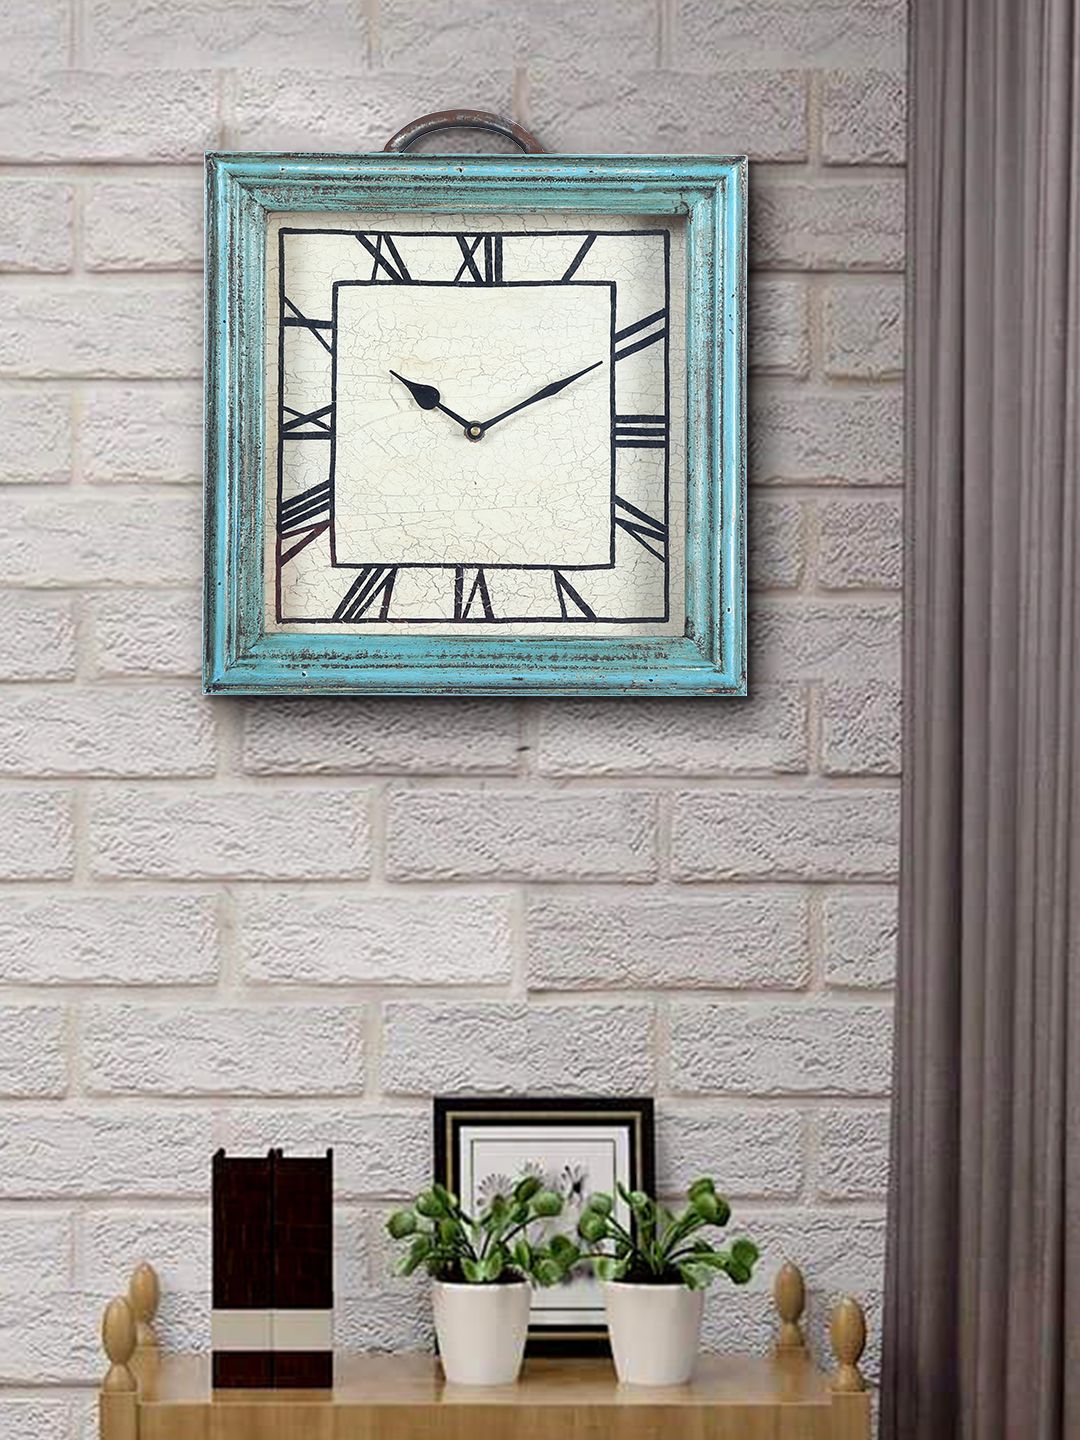 Aapno Rajasthan Blue Textured Square Analogue Wall Clock Price in India